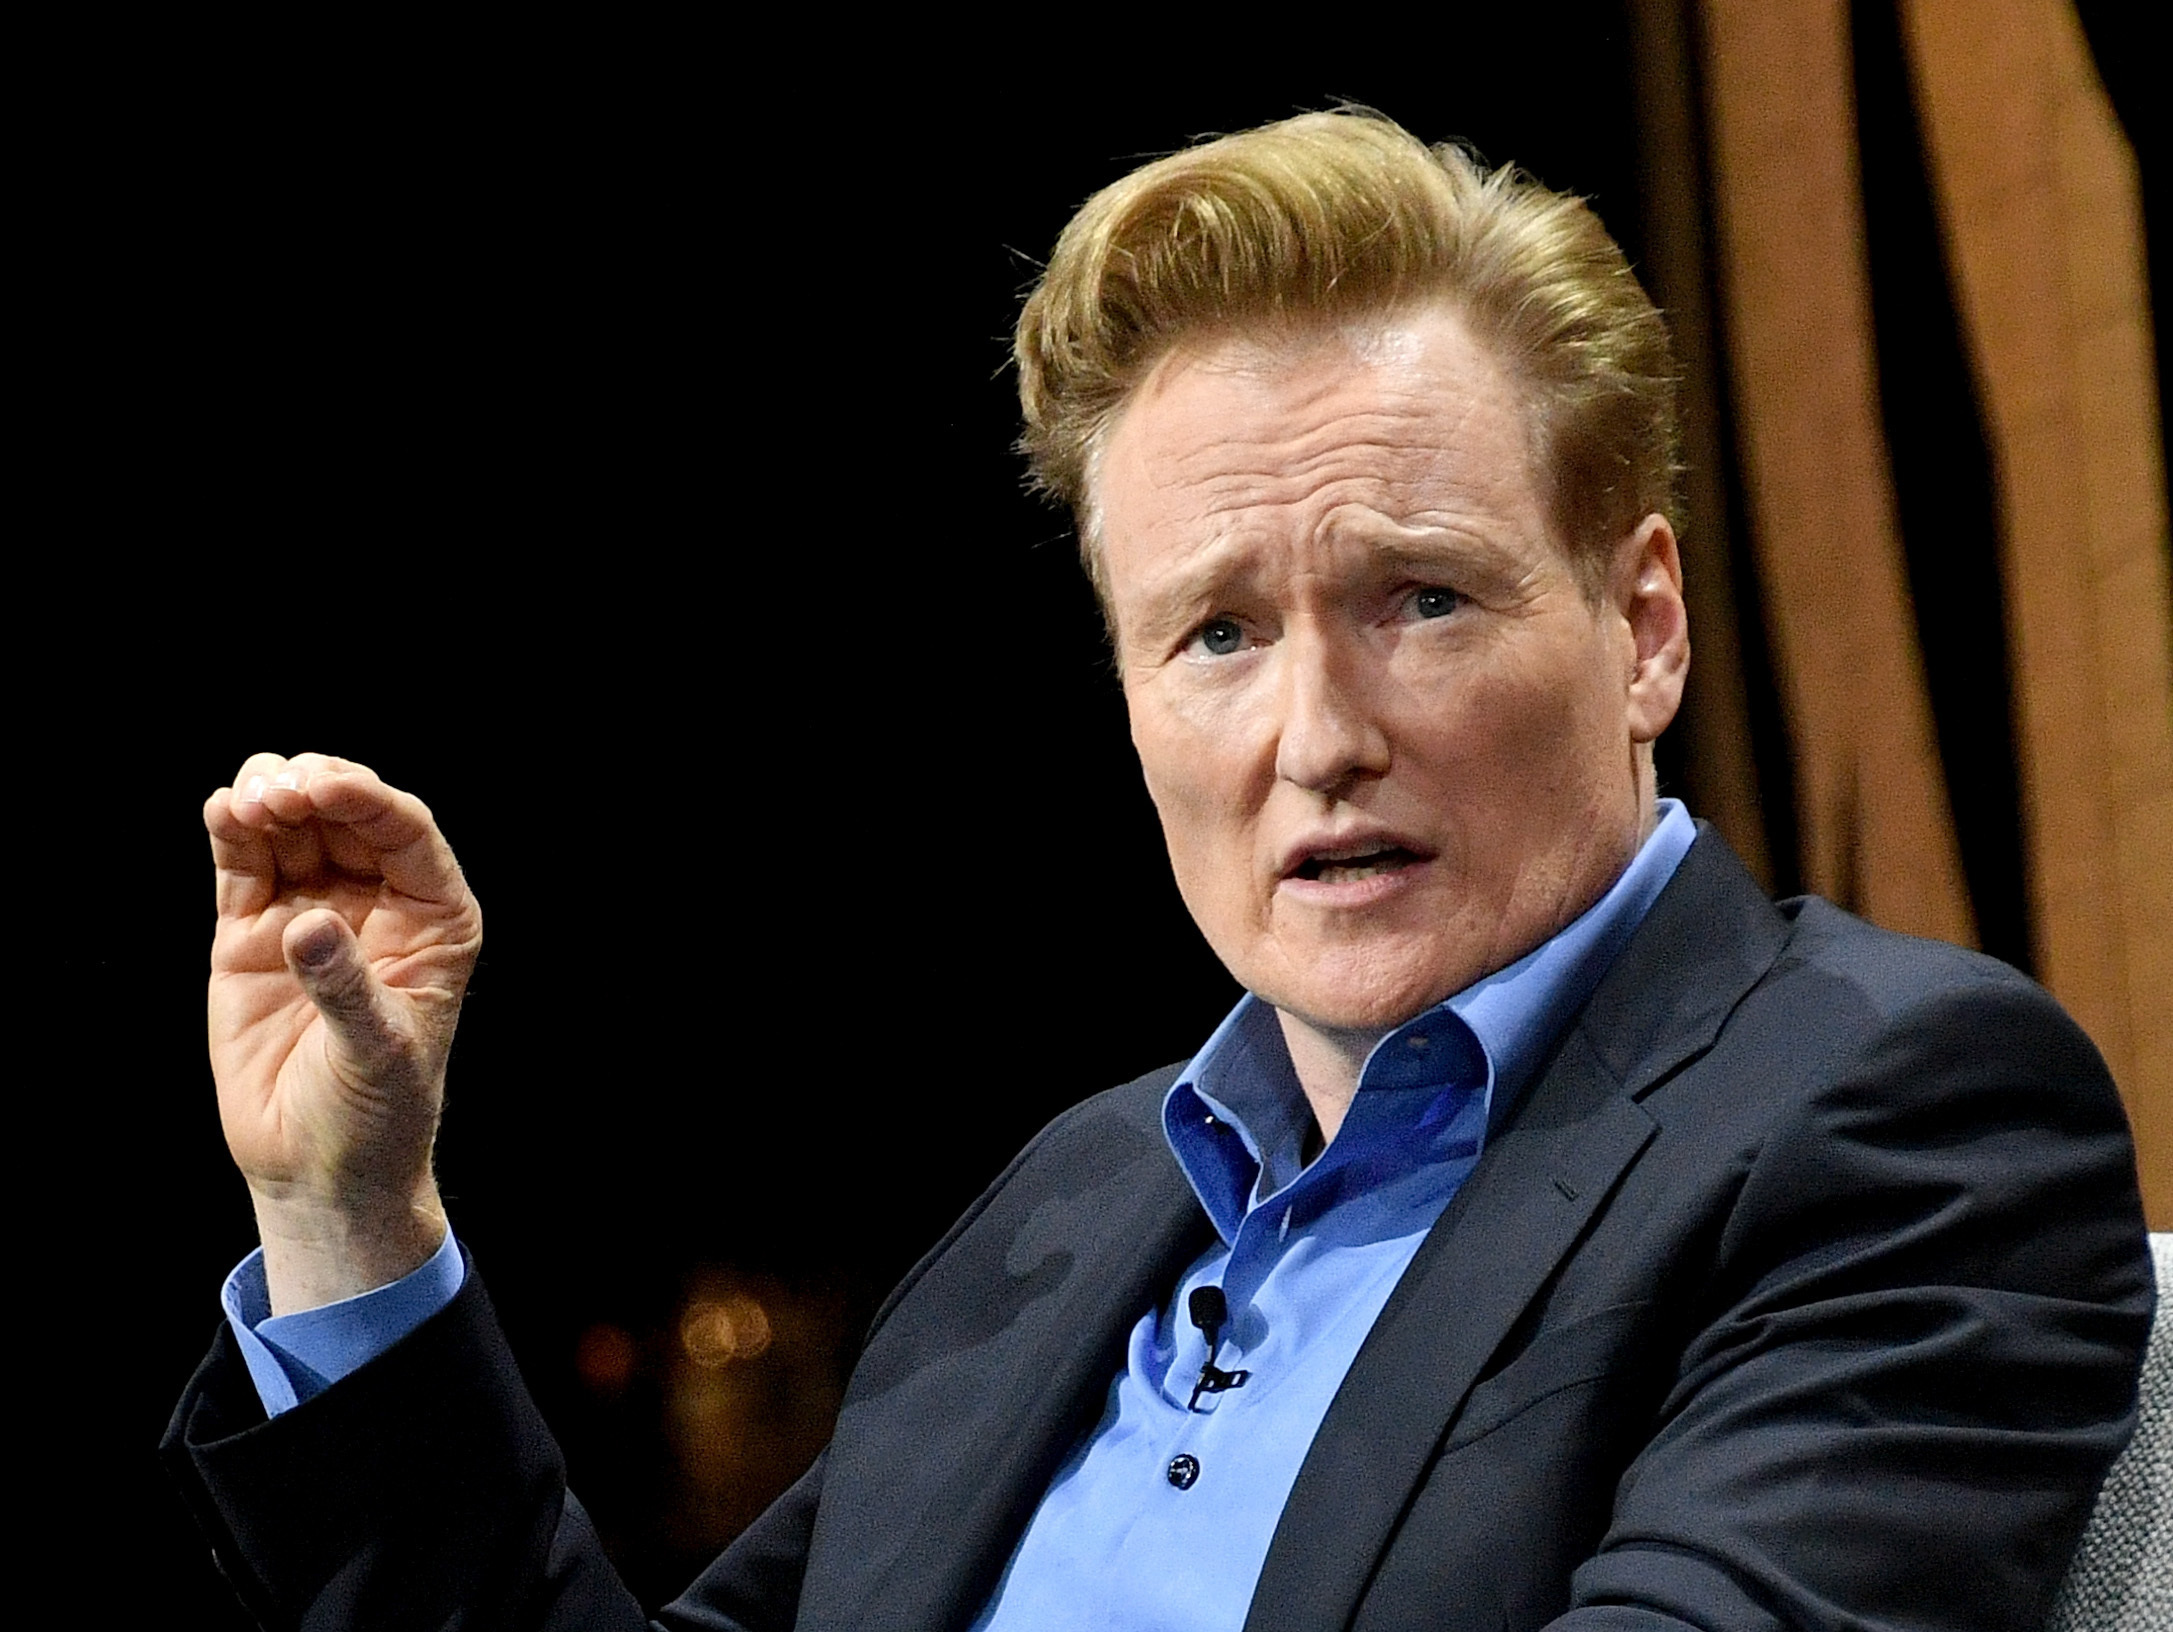 Late night TV host Conan O'Brien, pictured in 2016, has settled a lawsuit with a man who accused O'Brien and his writing staff of stealing his jokes. Mike Windle/Getty Images for Vanity Fair